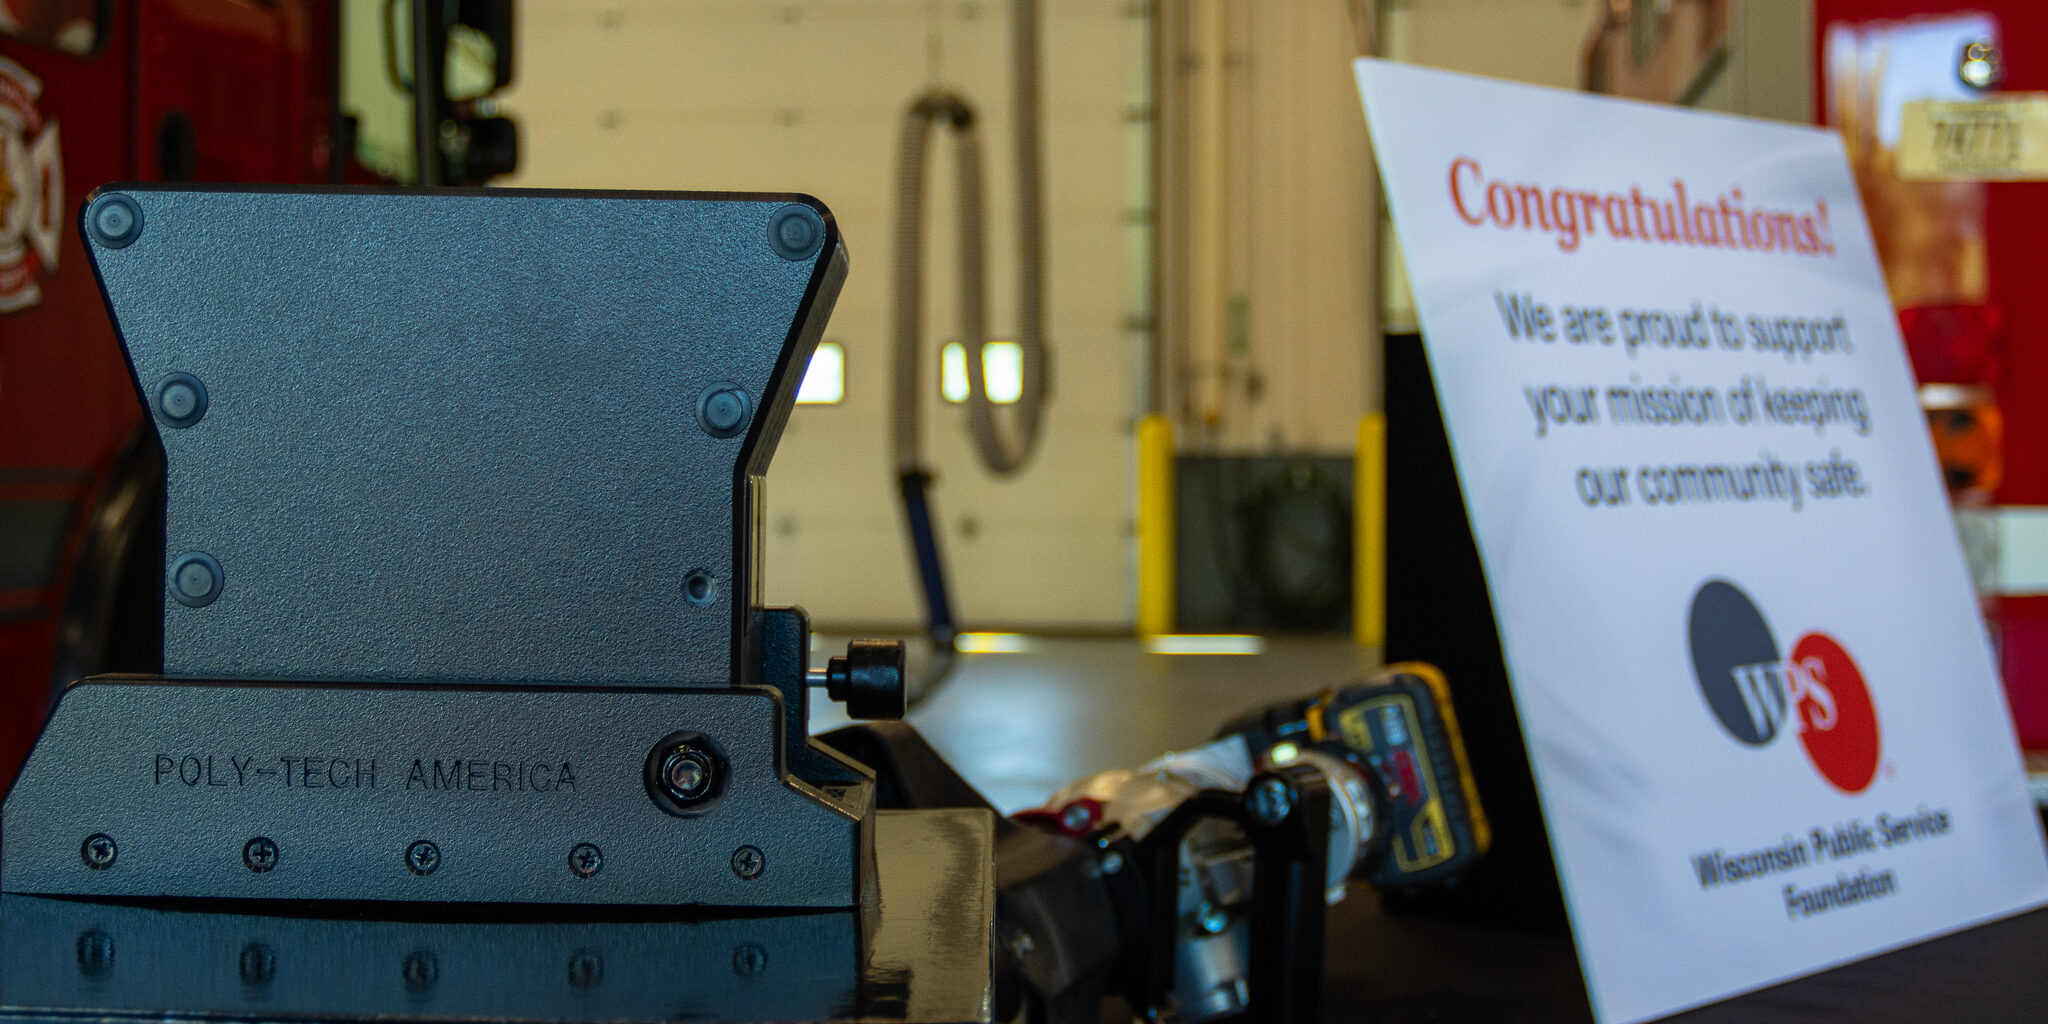 A black heavy-duty tool mount sits on a table in front of a congratulatory sign inside a fire department garage.